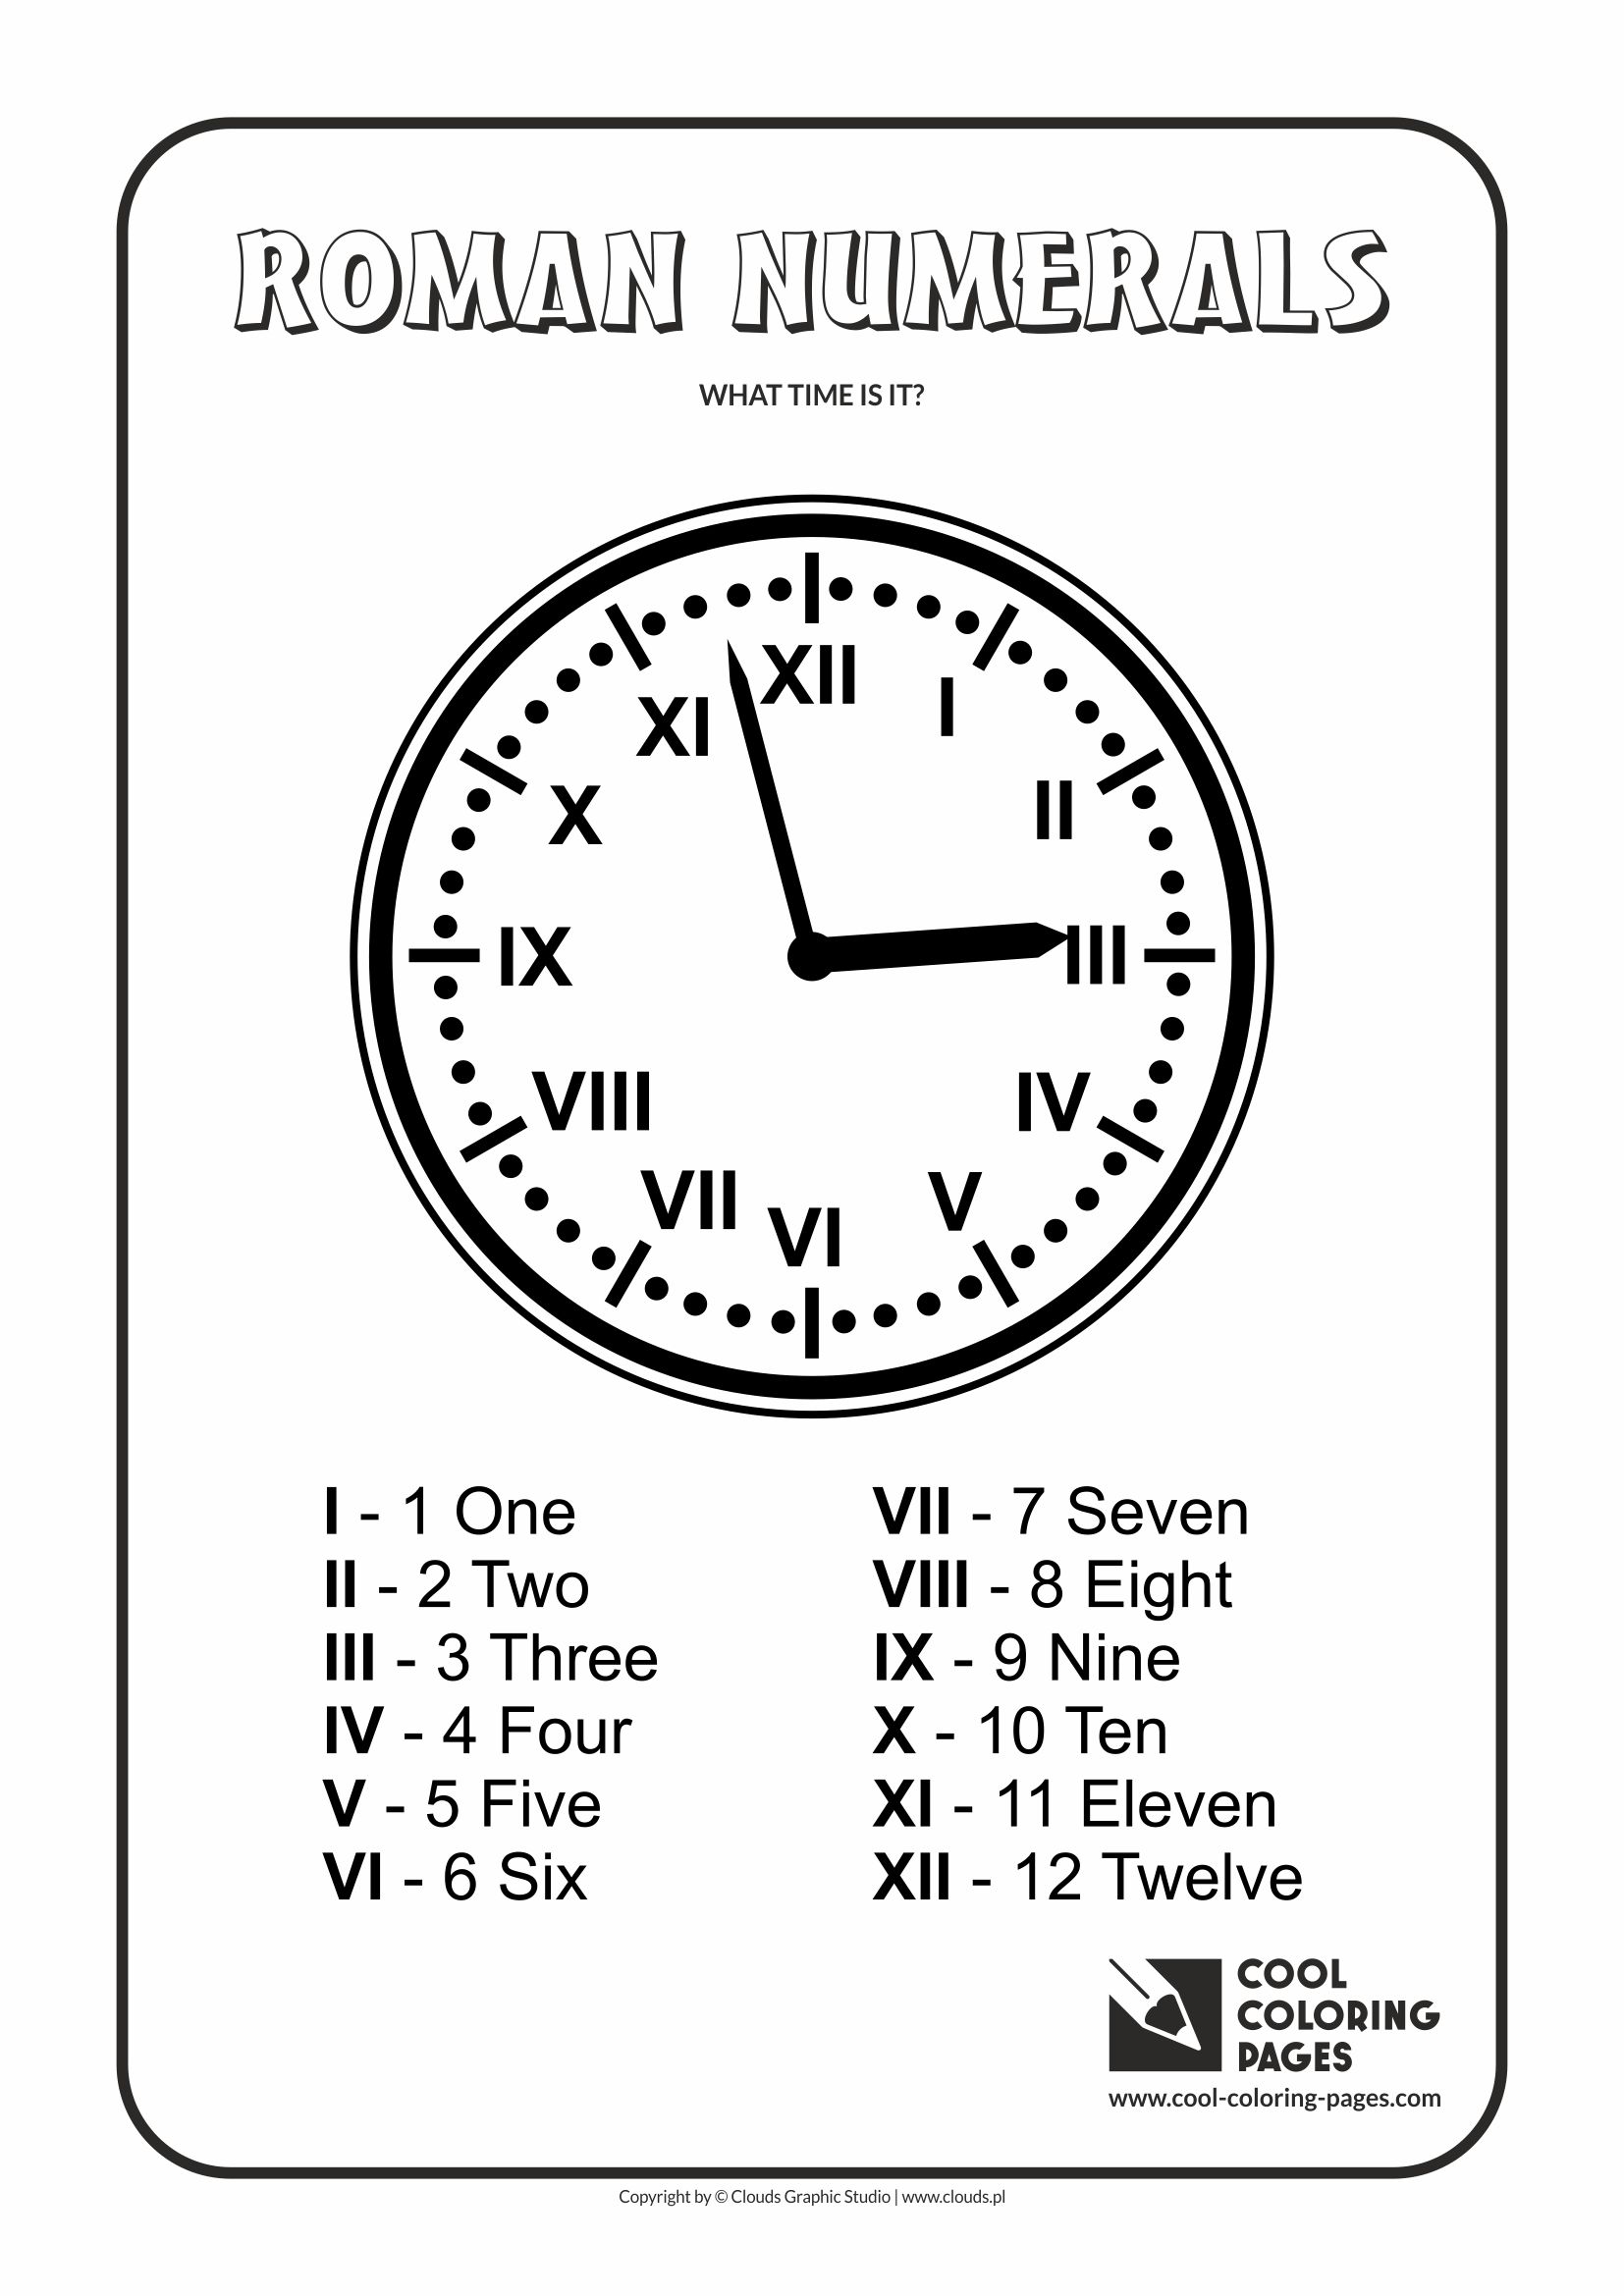 Cool Coloring Pages Roman numerals - Cool Coloring Pages | Free educational coloring ...1654 x 2339